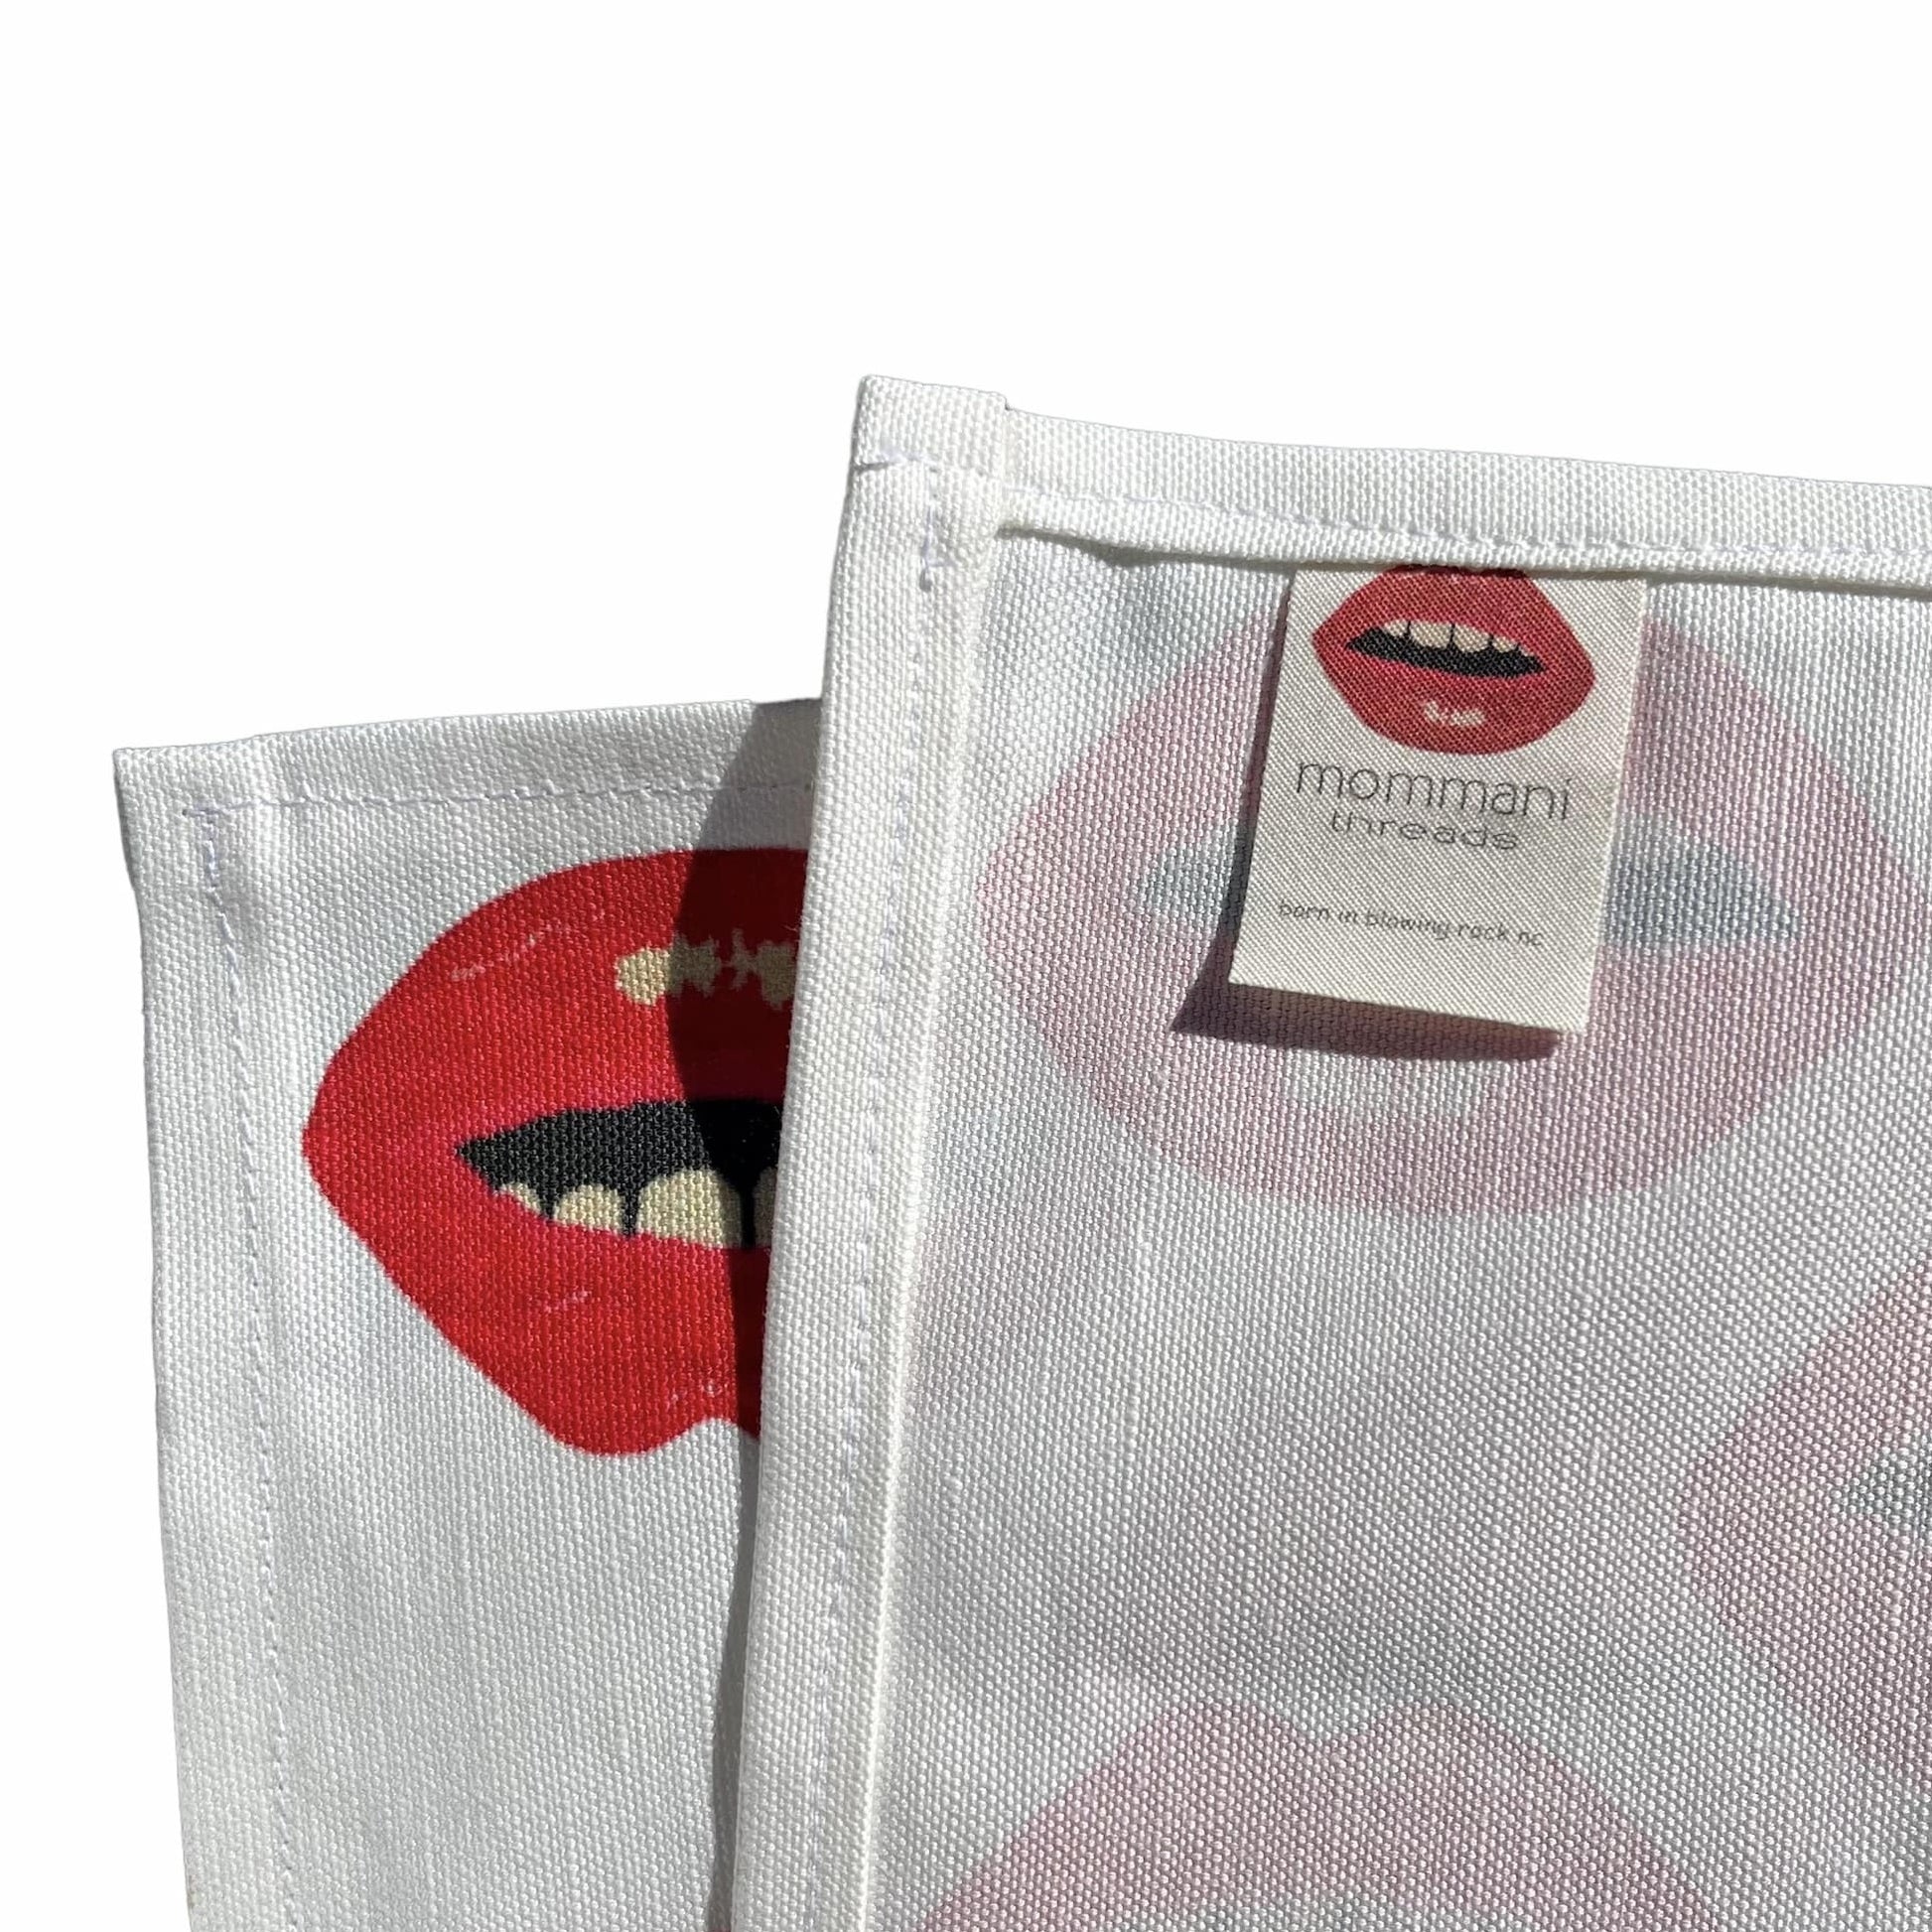 white tea towel covered  in rows of red lips scattered diagonally